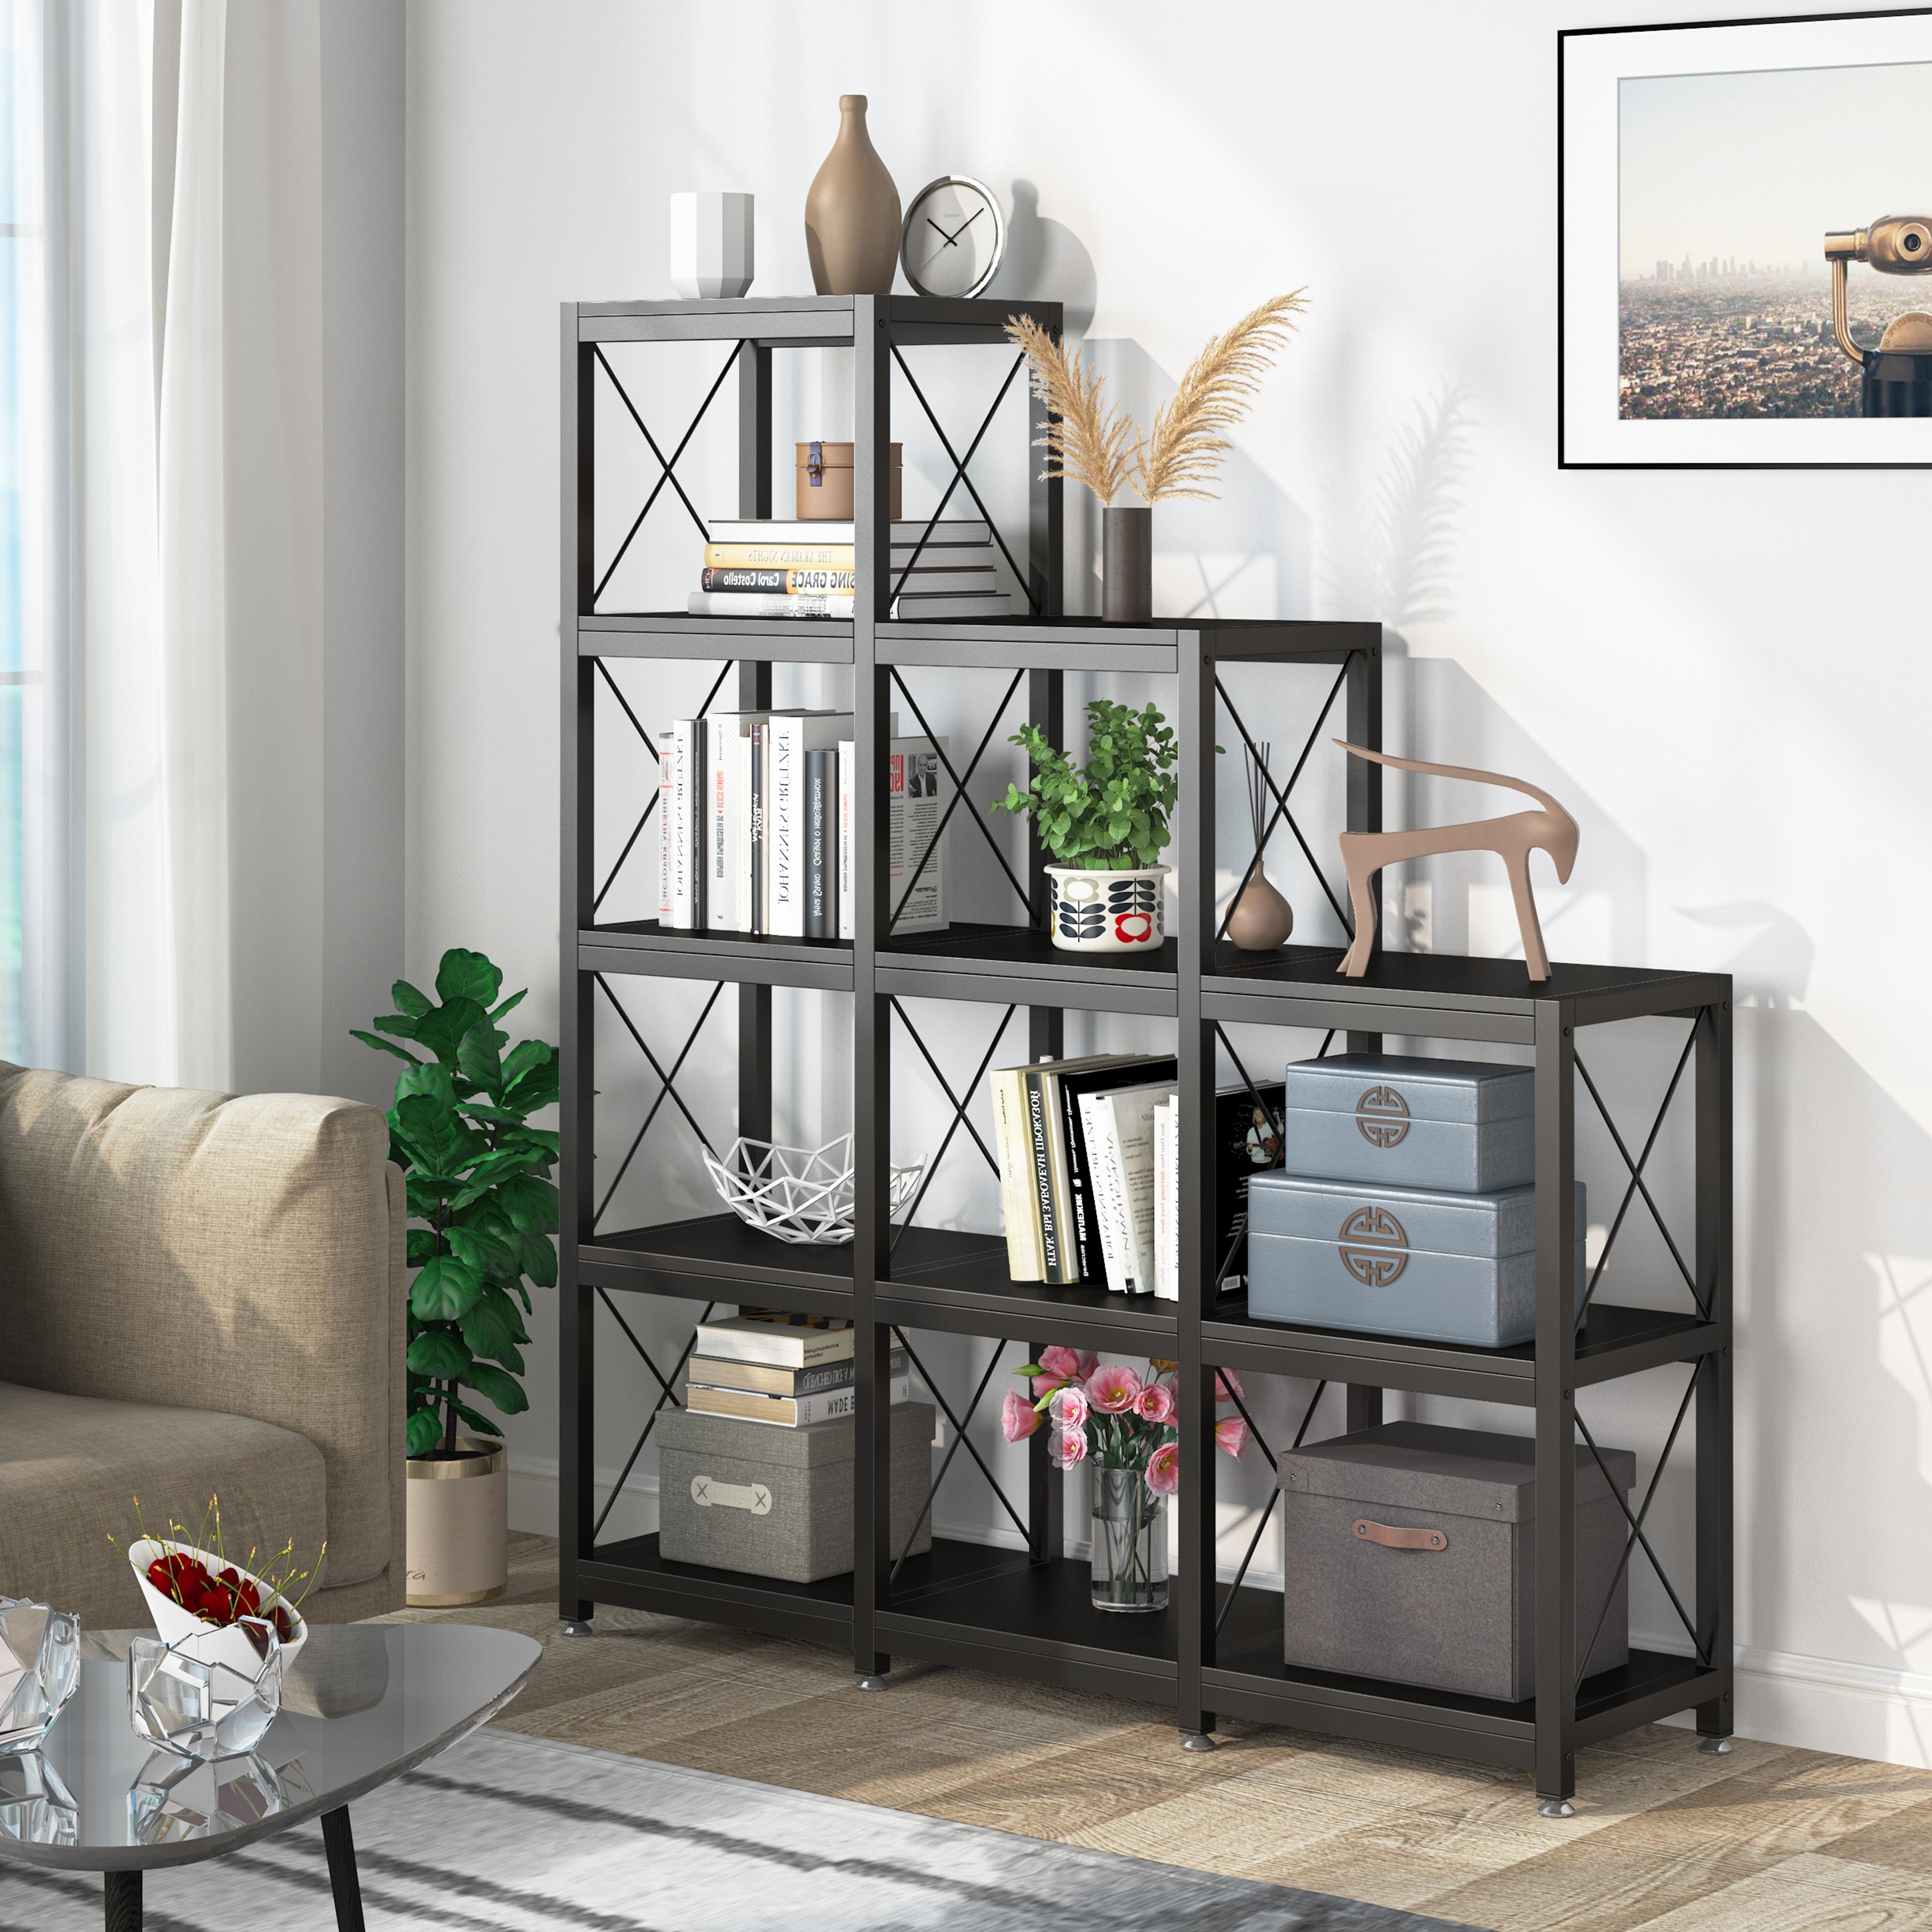 HomGarden 3-Tier 9 Cube Storage Organizer, Wood Bookcase Cabinet with Back  Panels for Home, Office, Entryway, Living Room - Dark Brown